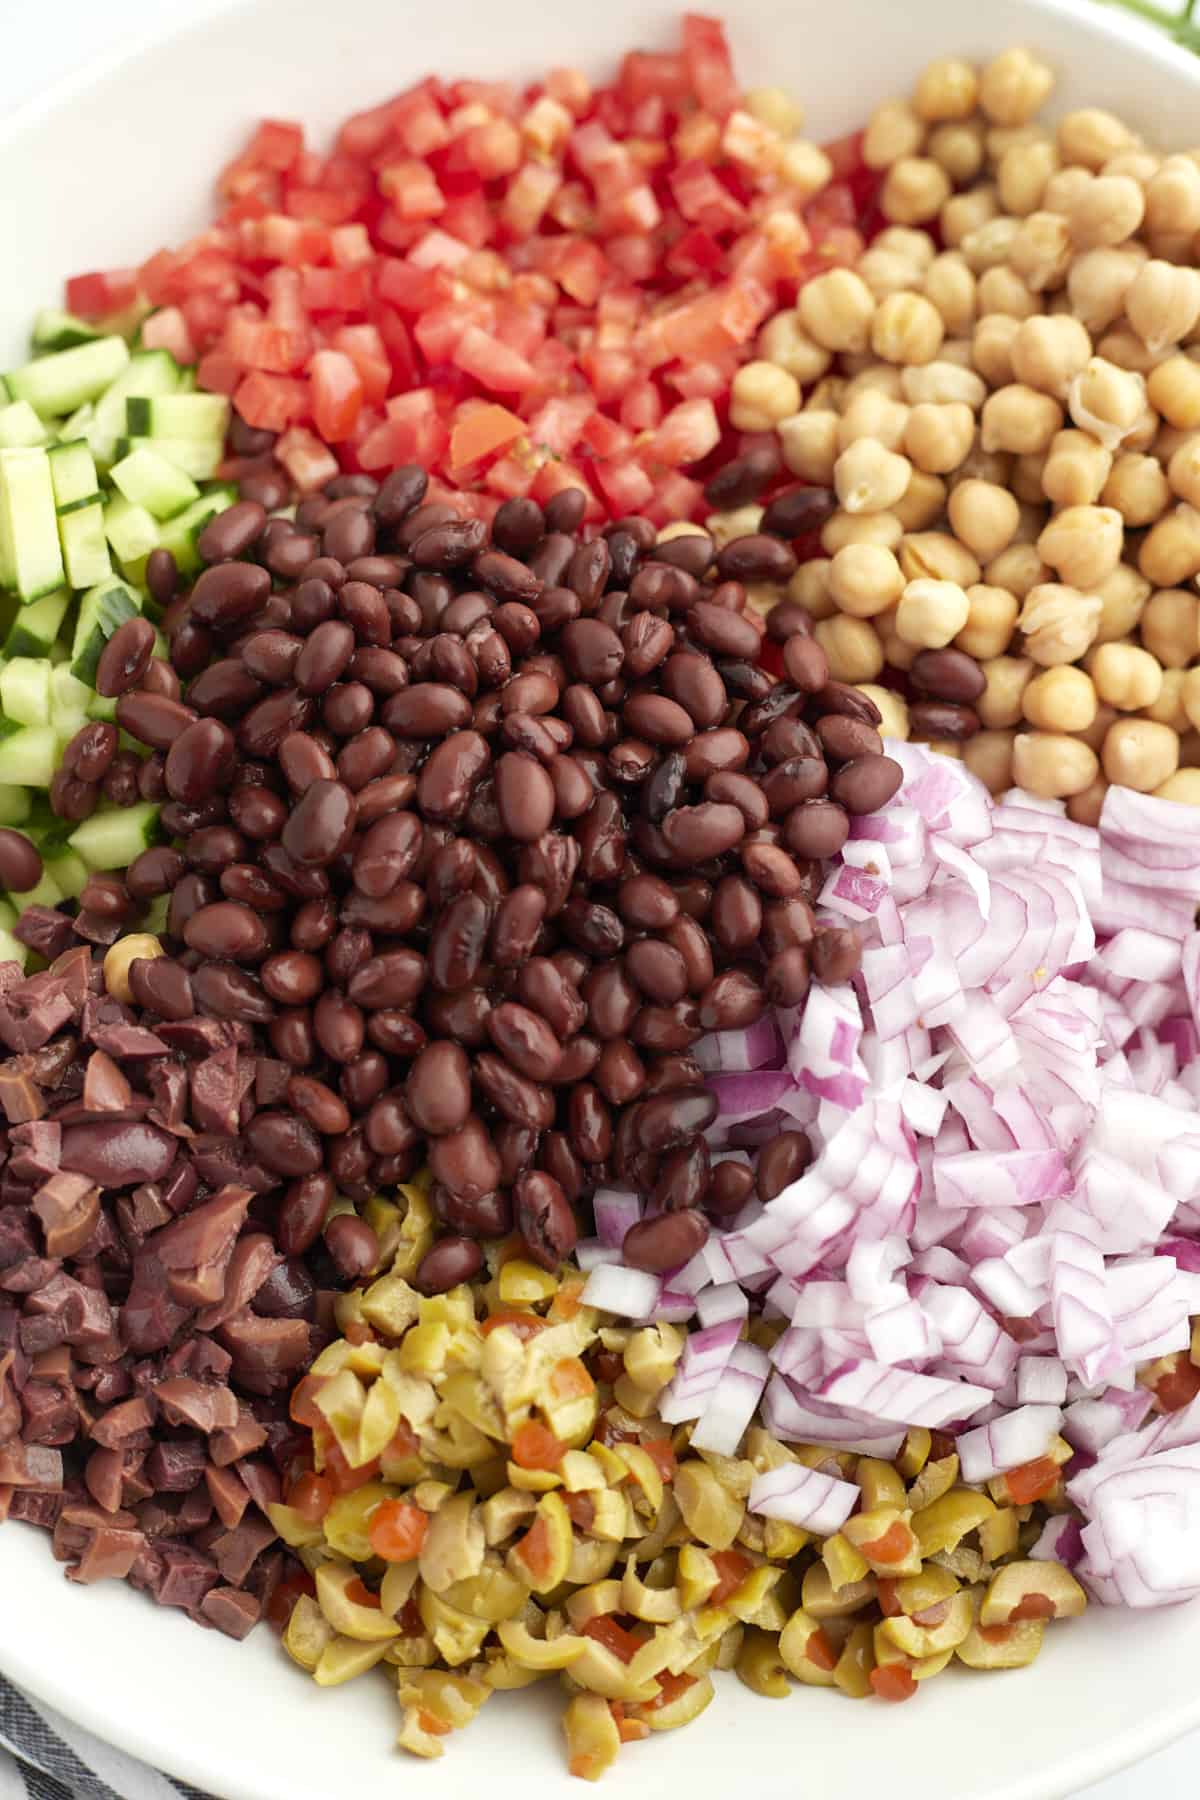 chopped tomatoes, chickpeas, red onion, corn, black beans, olives, and cucumbers in a bowl